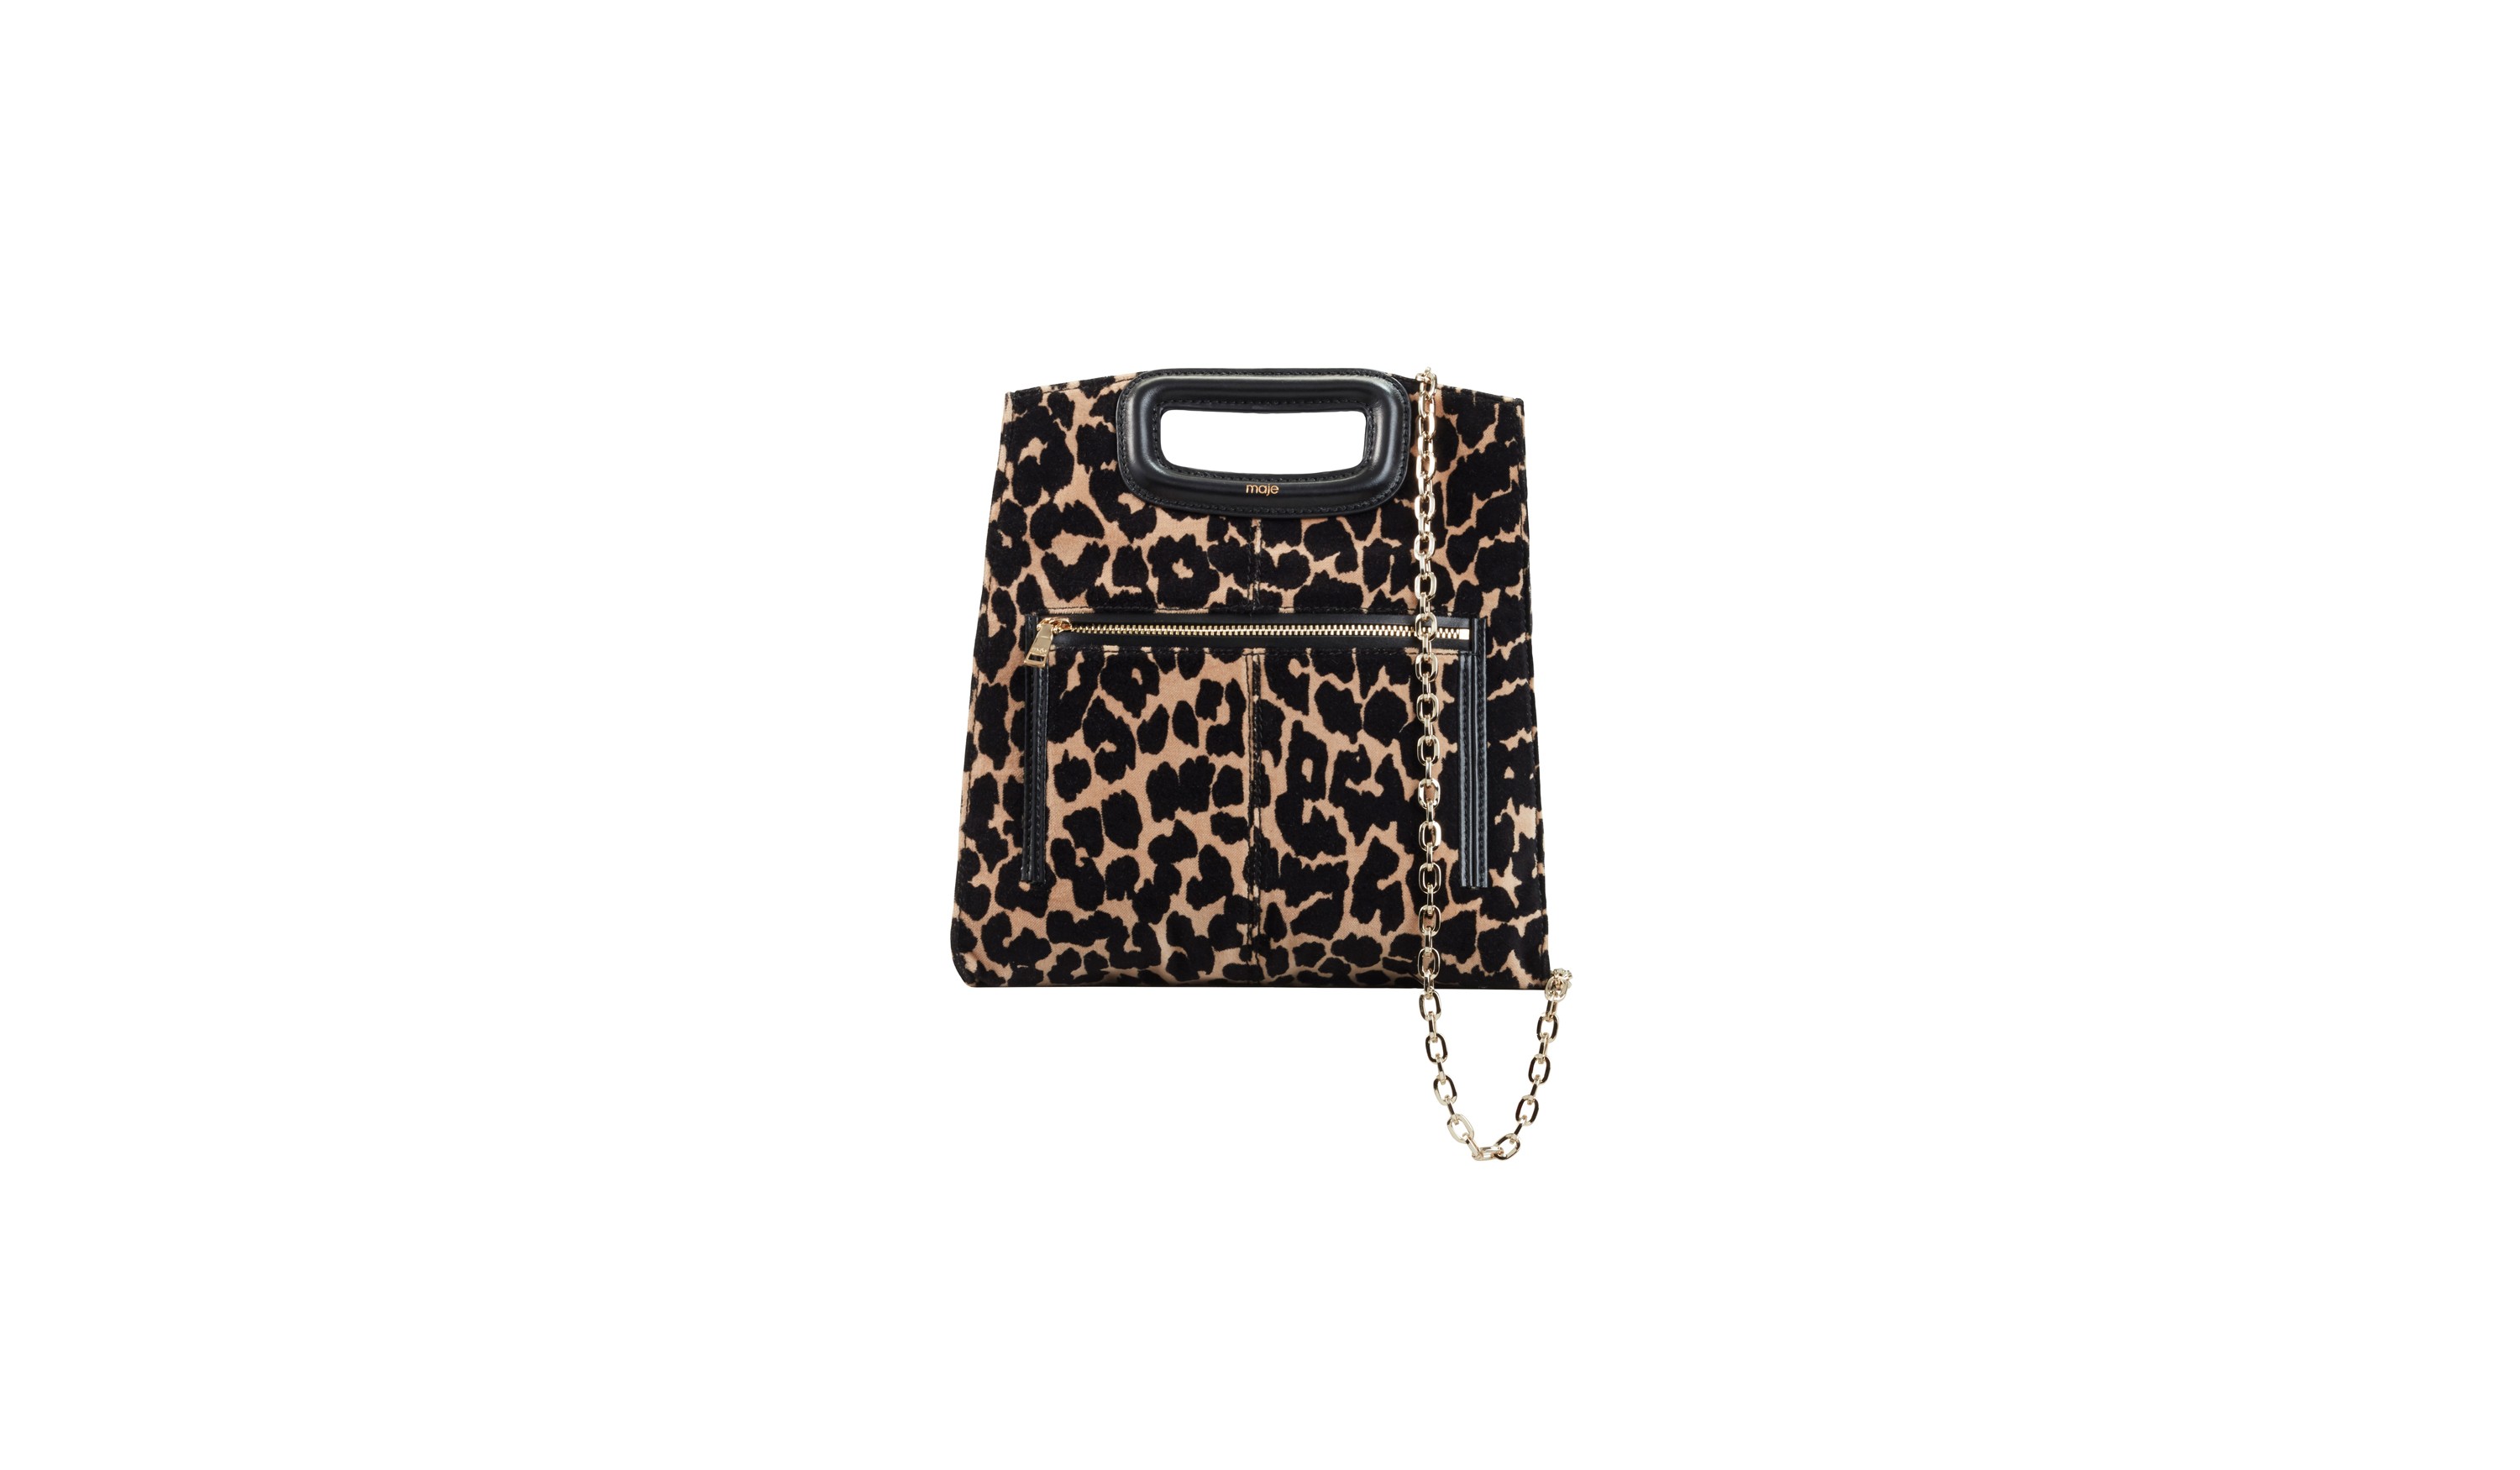 Check out the leopard-print bag by Maje and the Ports 1961 outfit